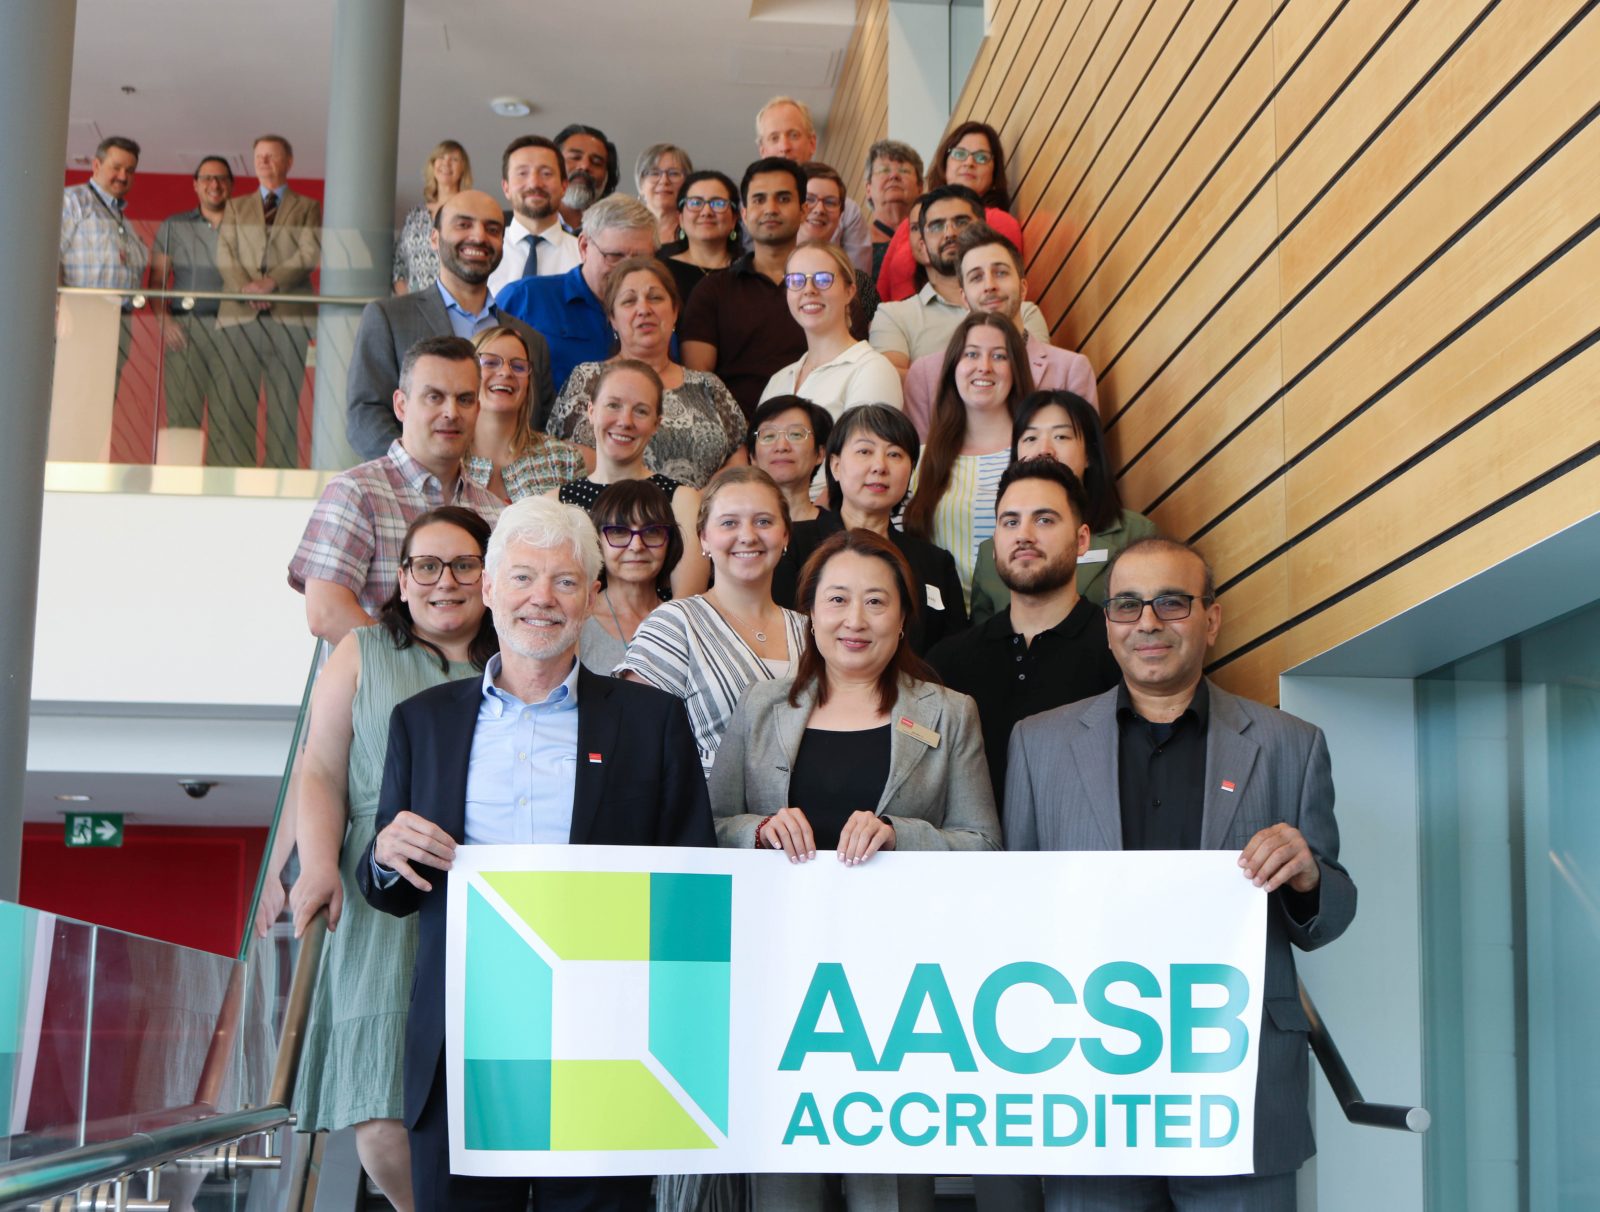 A large staircase is filled with people. At the bottom of the staircase, three people hold a sign stretching the width of the staircase that says AACSB Accredited and has a green square logo.